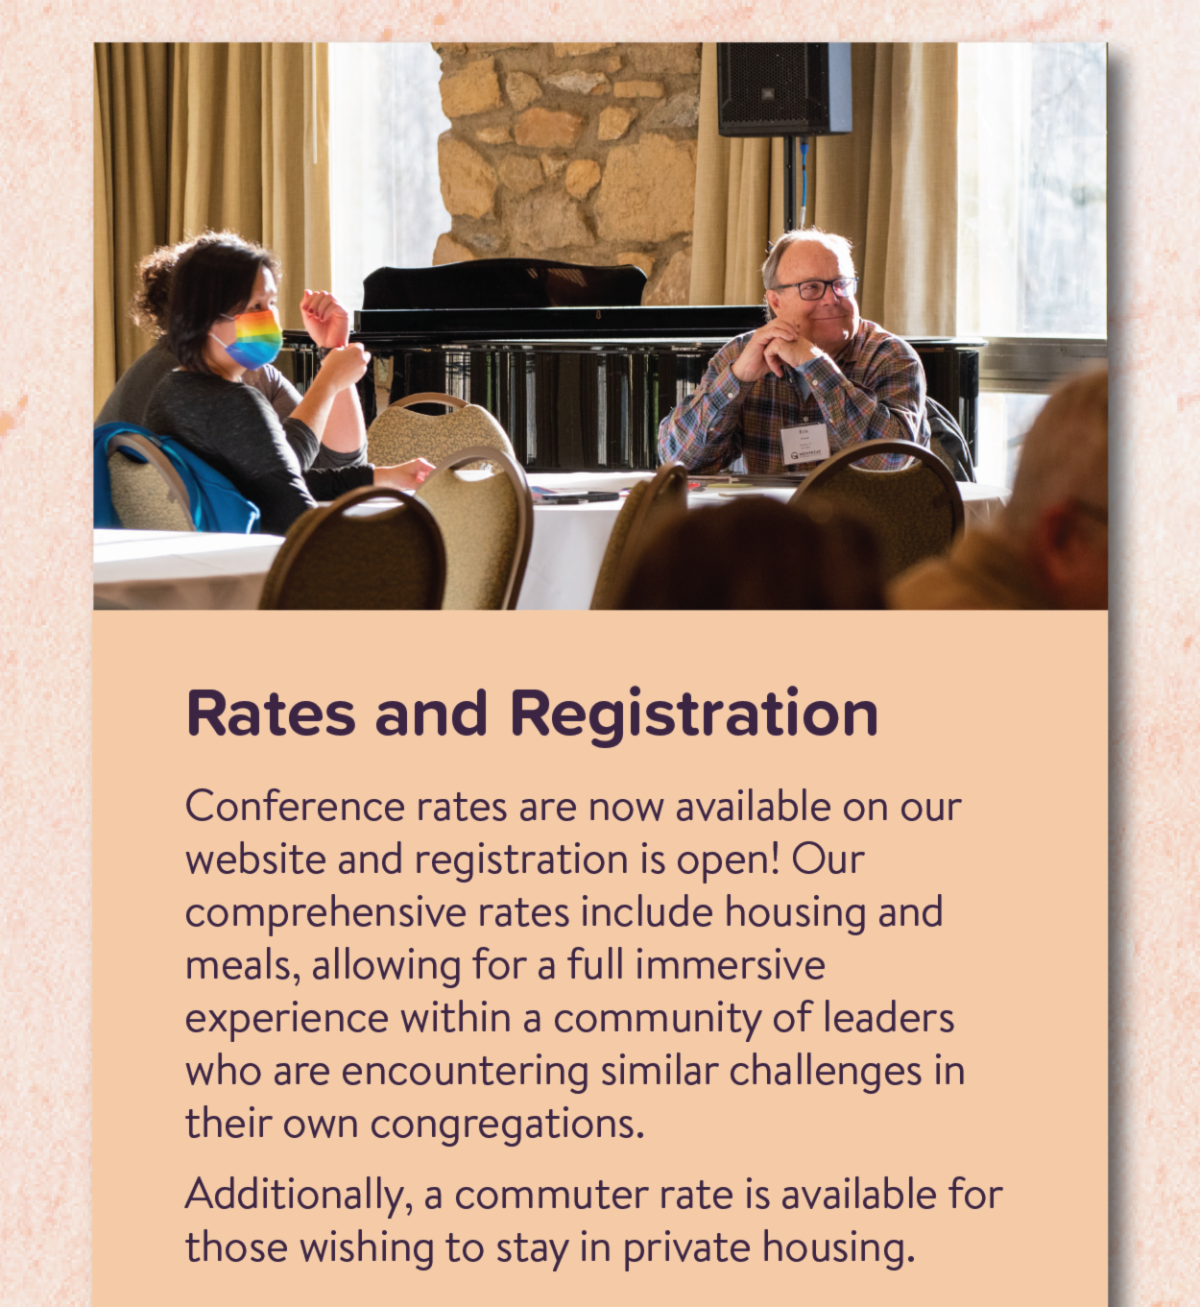 Rates and Registration - Conference rates are now available on our website and registration is open! Our comprehensive rates include housing and meals, allowing for a full immersive experience within a community of leaders who are encountering similar challenges in their own congregations.  Additionally, a commuter rate is available for those wishing to stay in private housing.